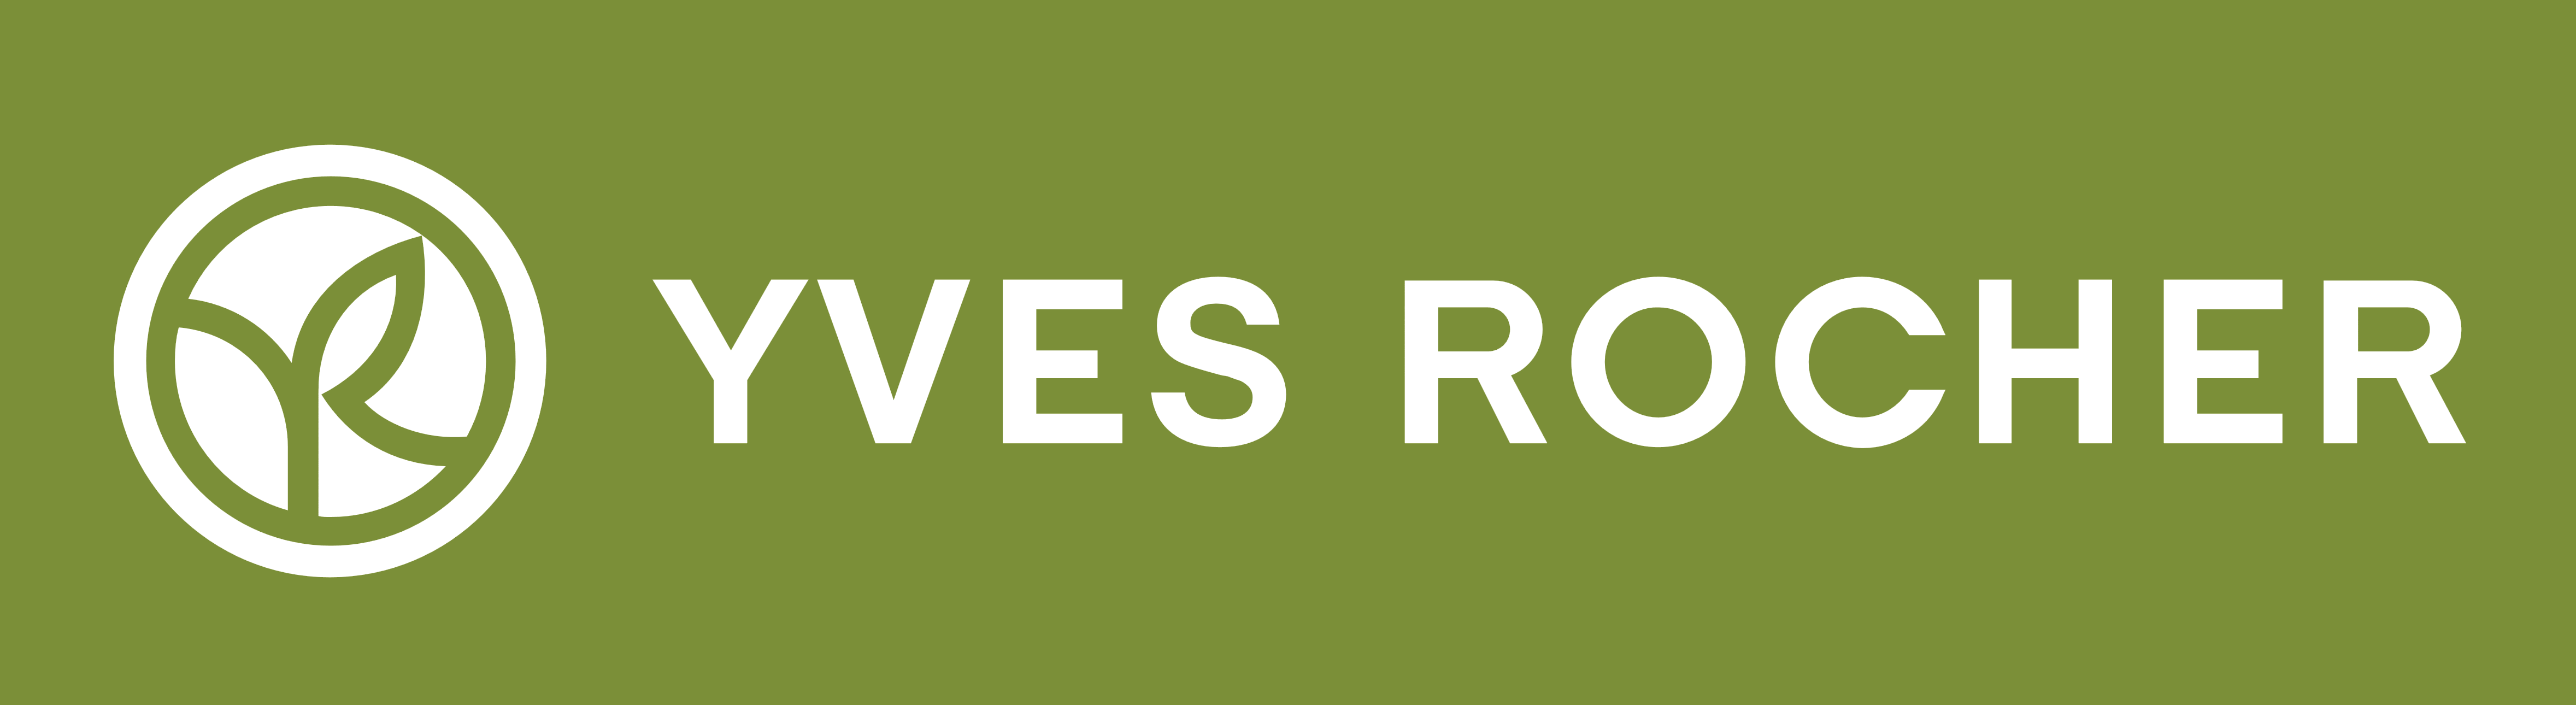 Yves Rocher Logo, symbol, meaning, history, PNG, brand